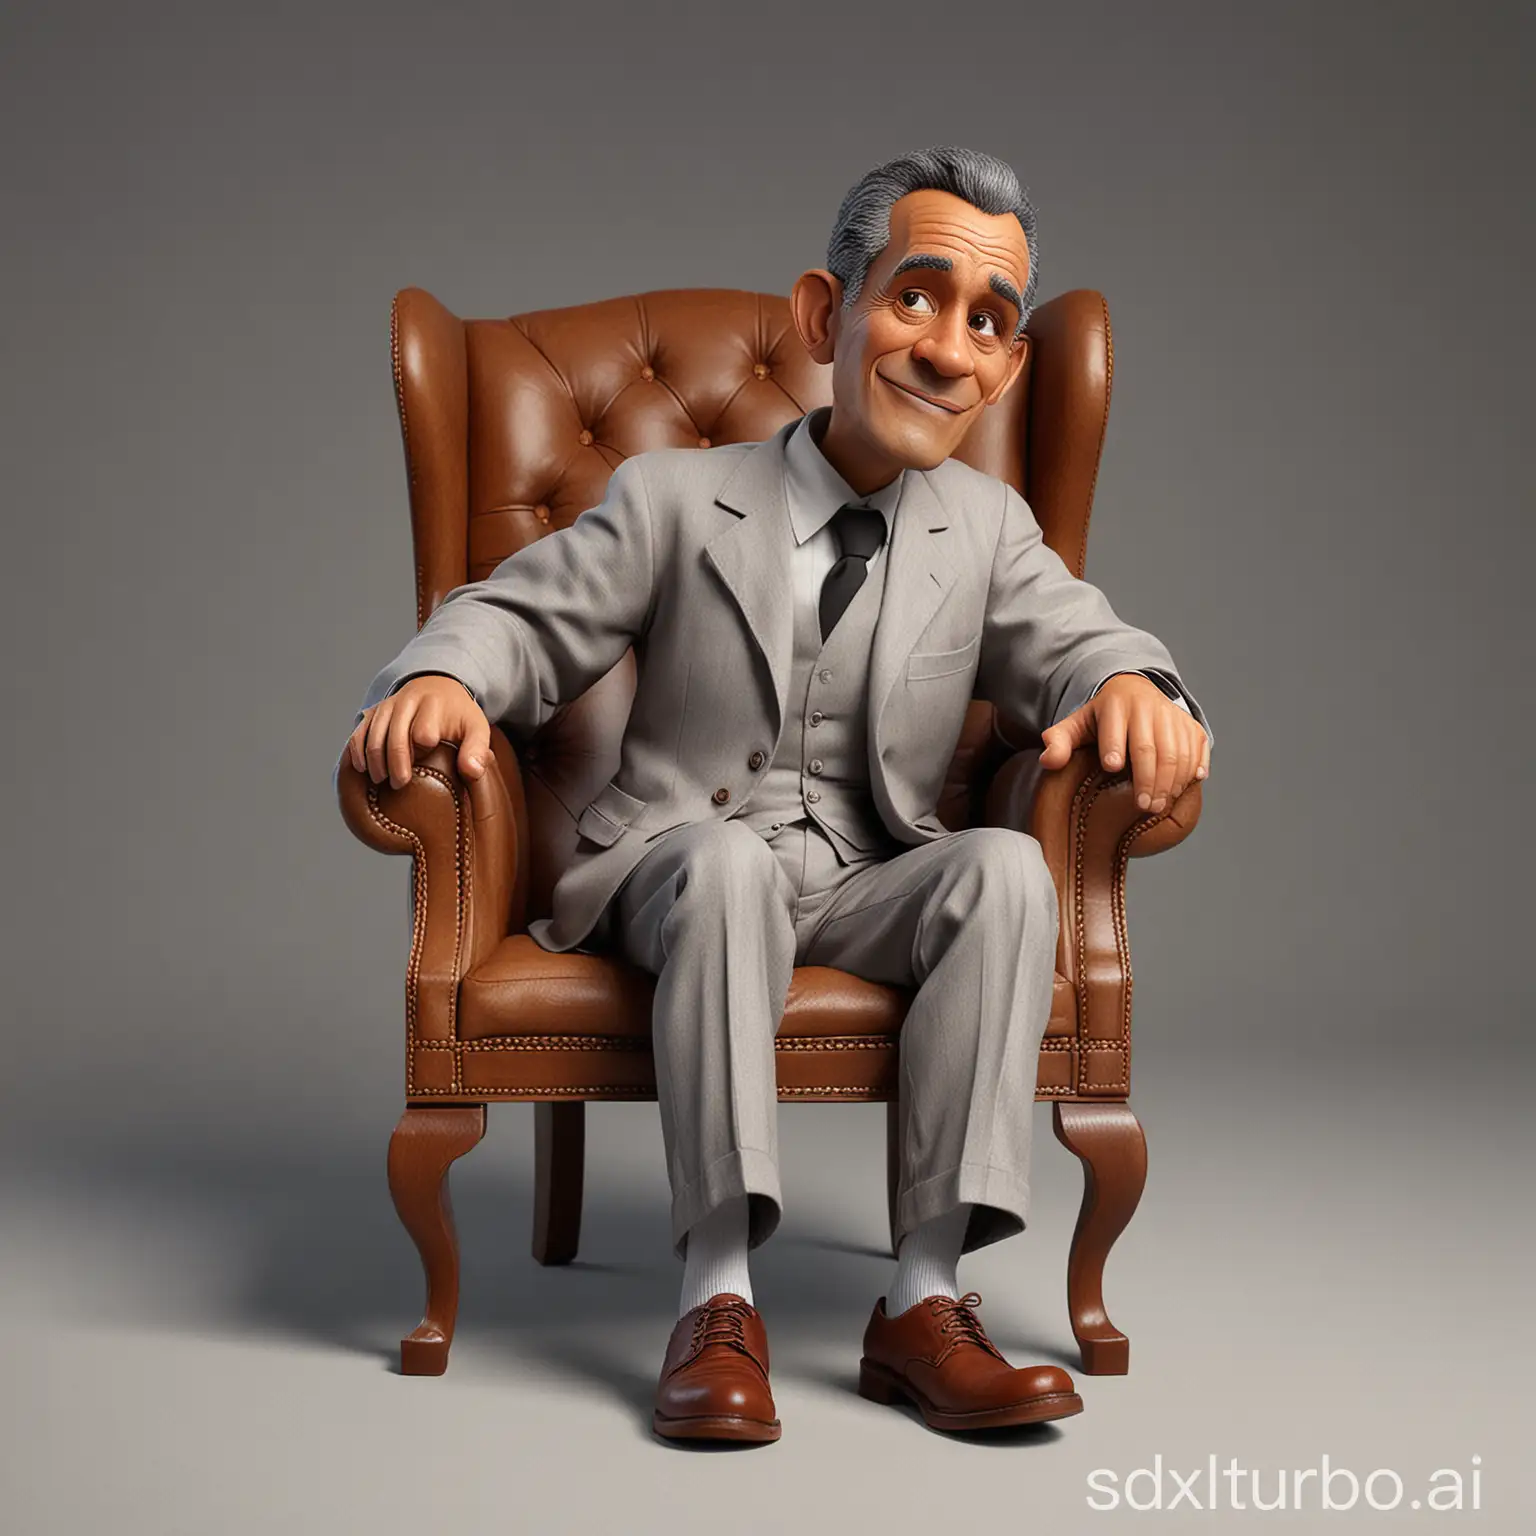 Barack-Obama-and-Abraham-Lincoln-Realistic-3D-Pixar-Style-Portrait-in-Classic-Setting